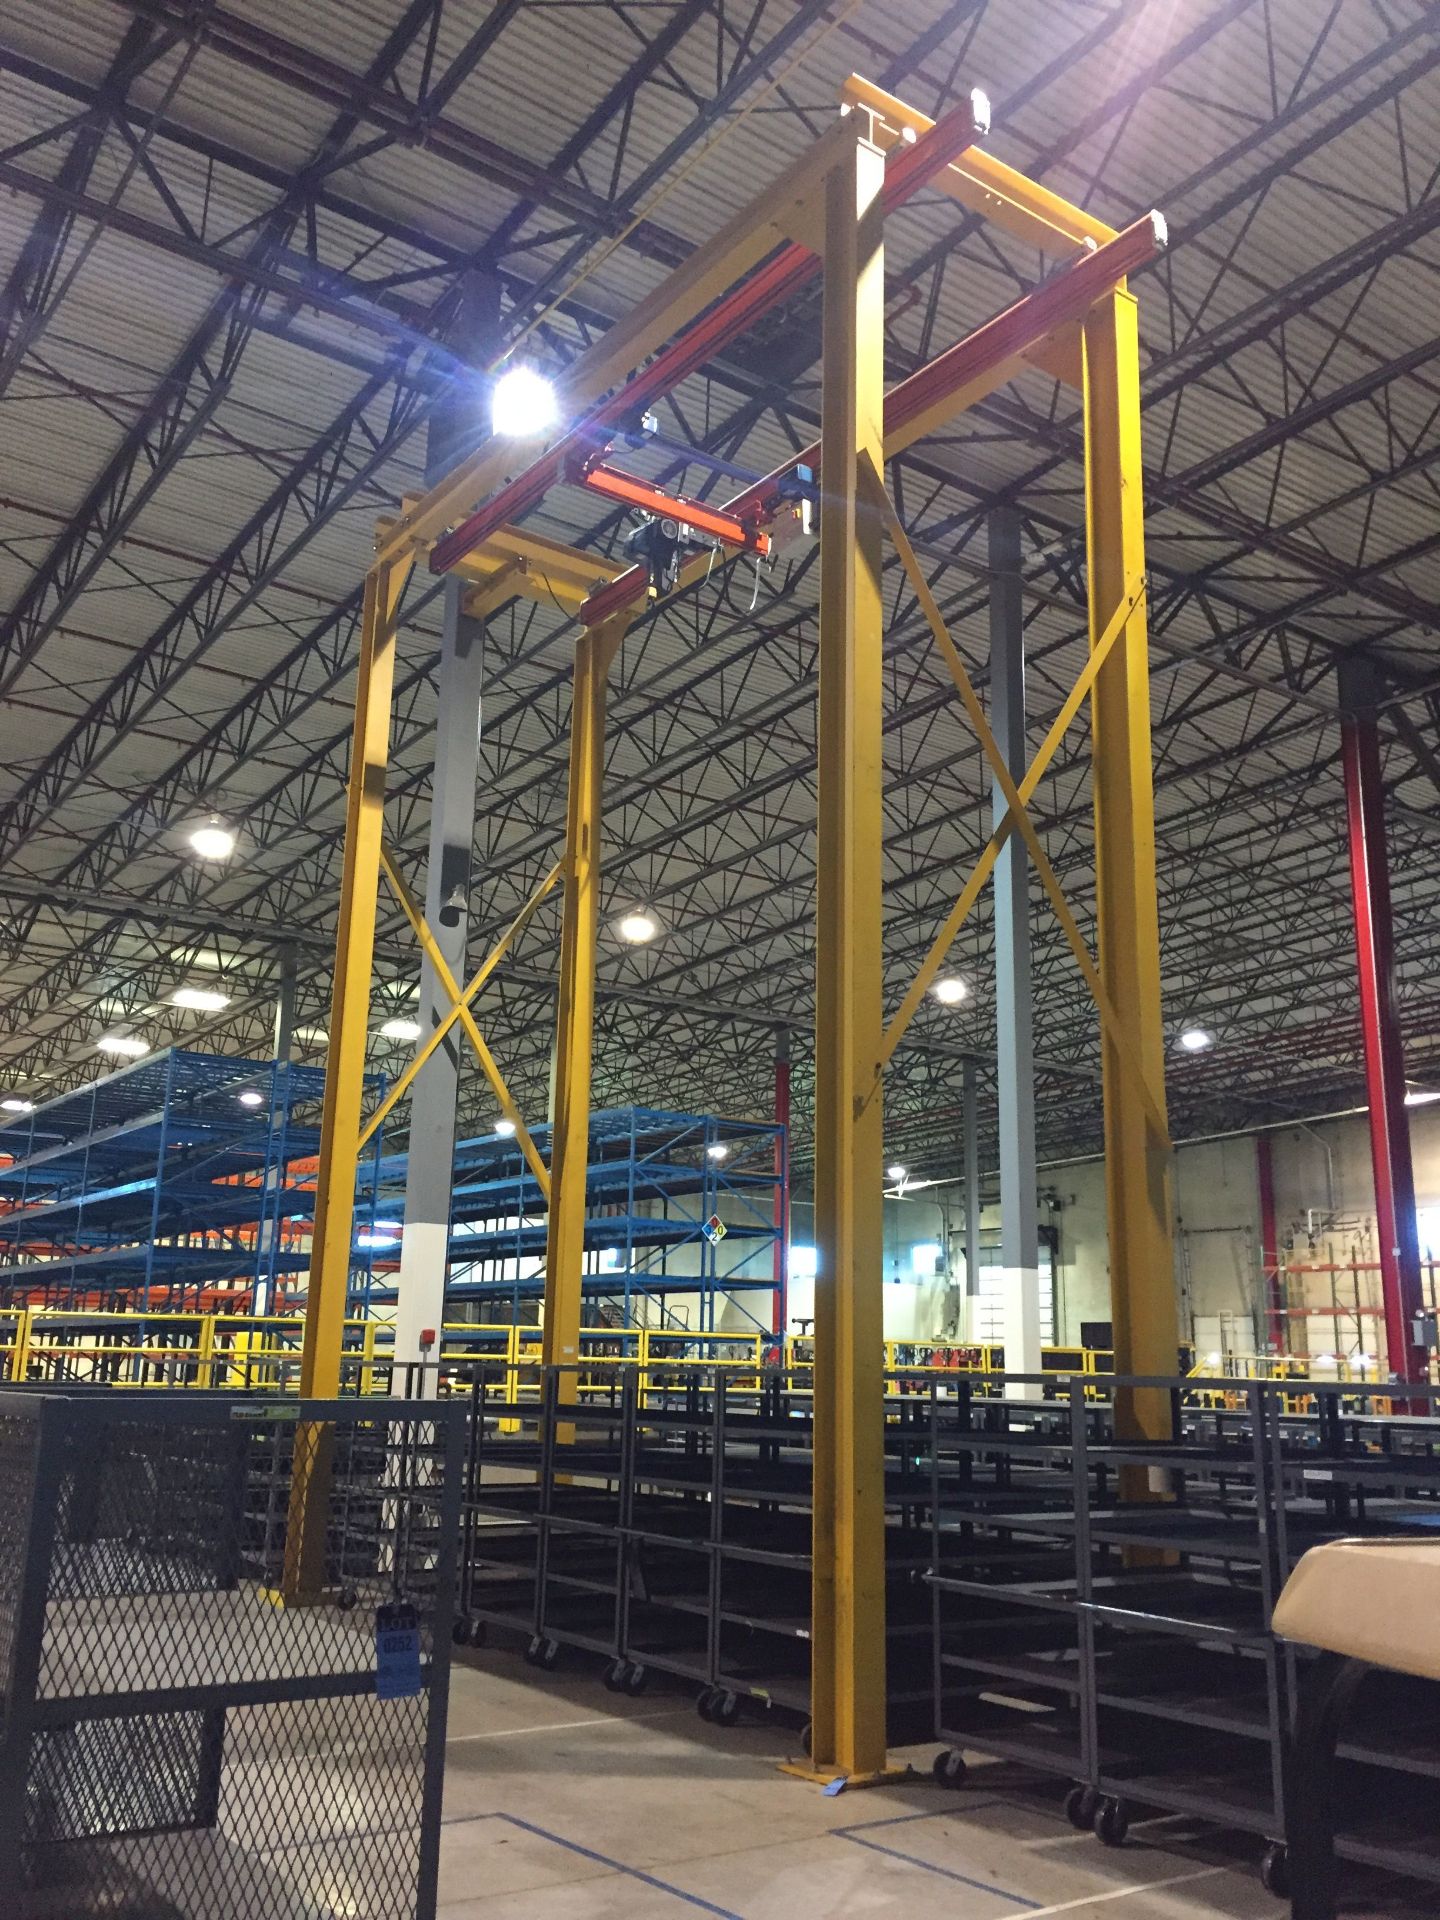 2,200 LB. CAPACITY DEMAG FREE STANDING REMOTE CONTROL CHAIN HOIST CRANE SYSTEM (APPROX.) 8' X 23'